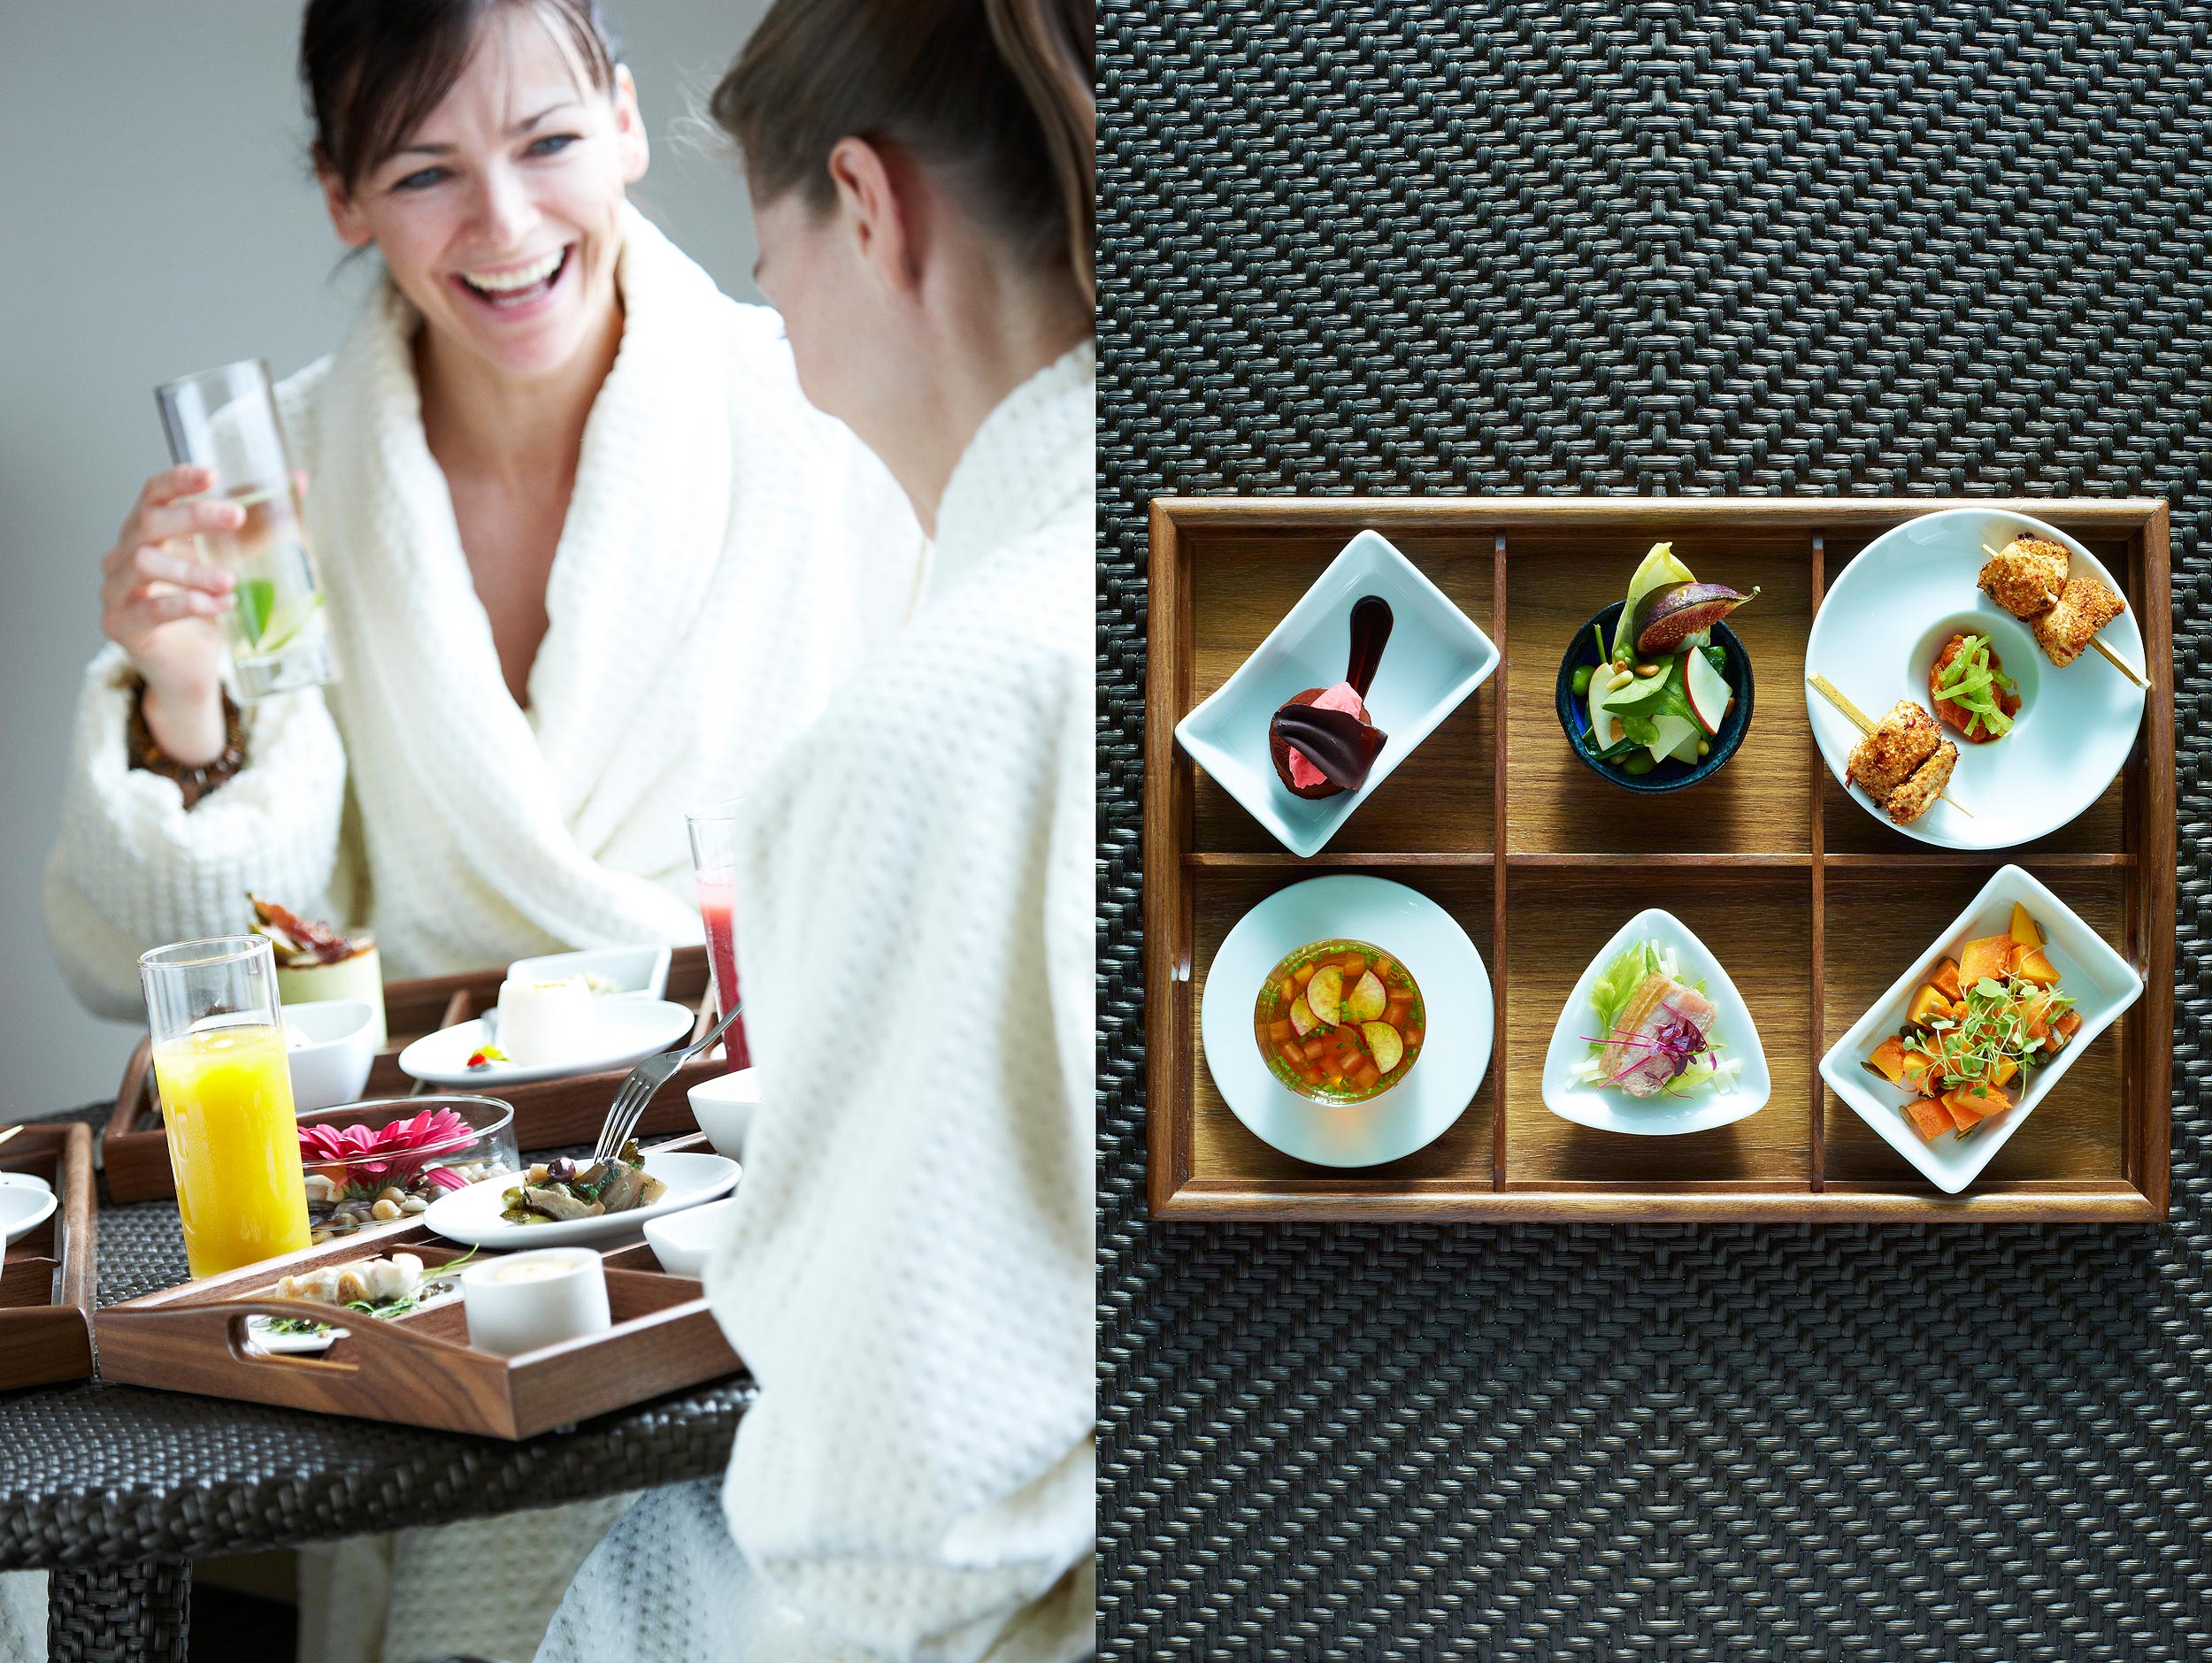 Lunch time at The Spa, Gleneagles, Scotland.  Food & lifestyle photography by Mike Caldwell